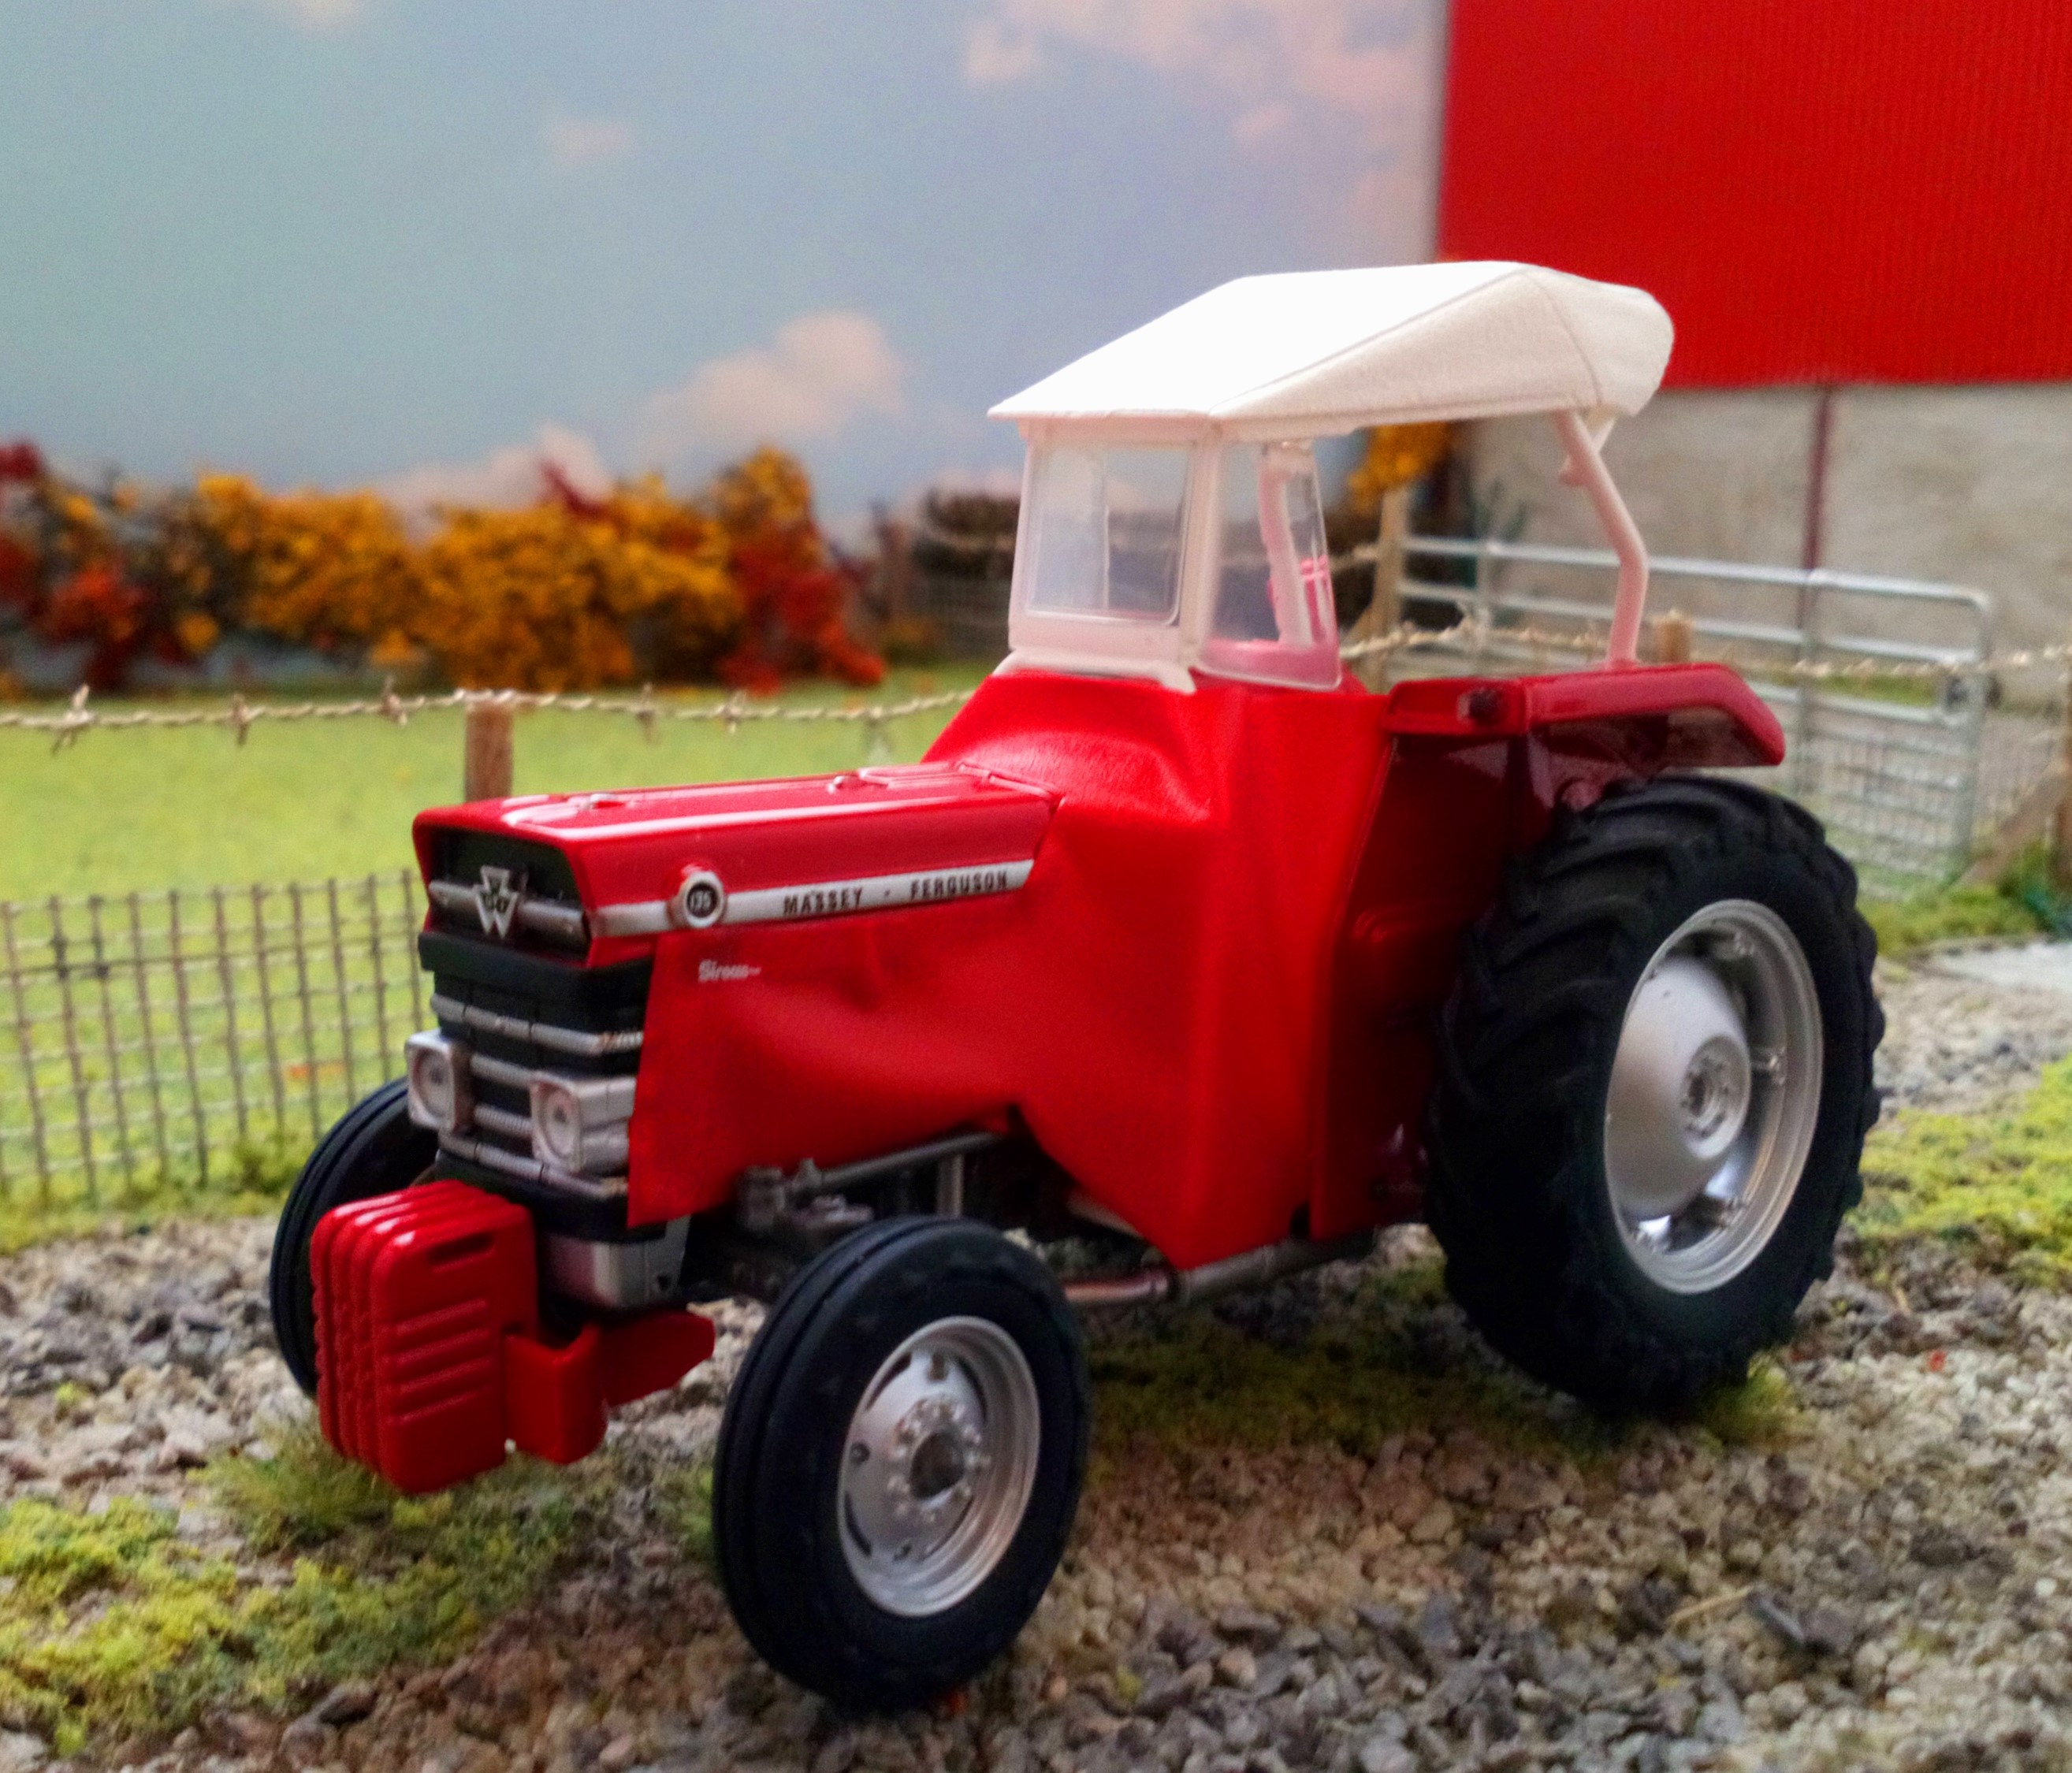 UNIVERSAL HOBBIES 5292 1:32 SCALE MASSEY FERGUSON 135 WITH RED SIROCCO LIMITED